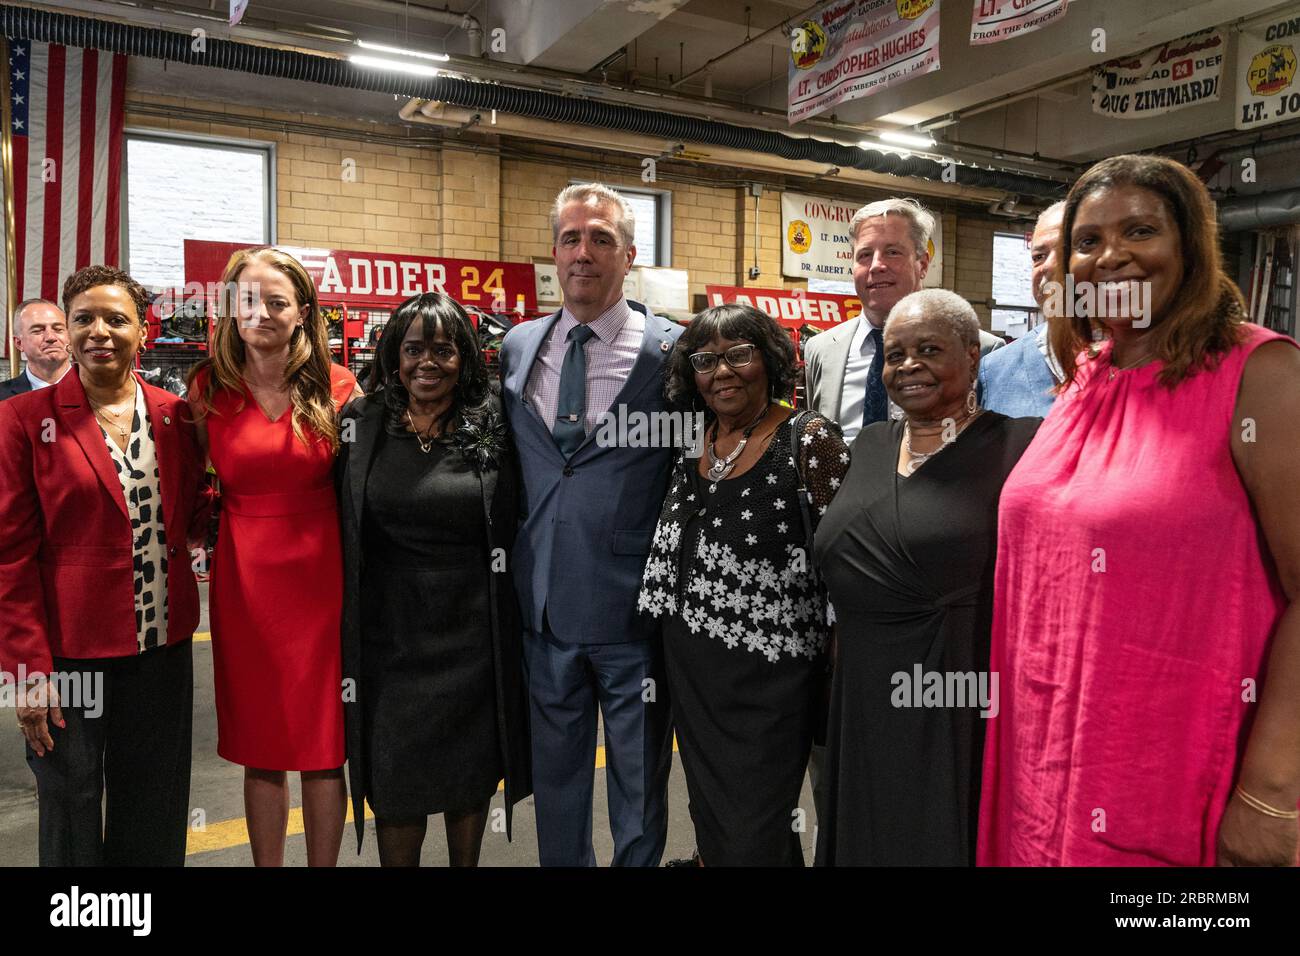 Adrienne Adams, Laura Kavanagh, Gwendolyn Webb, James McCarthy, Gwendolyn Gamble, Gloria Washington, Letitia James attend press conference on anniversary of Children's Crusade or Children's March as it is known at FDNY Engine 1, Ladder 24 station in New York on July 10, 2023 Stock Photo